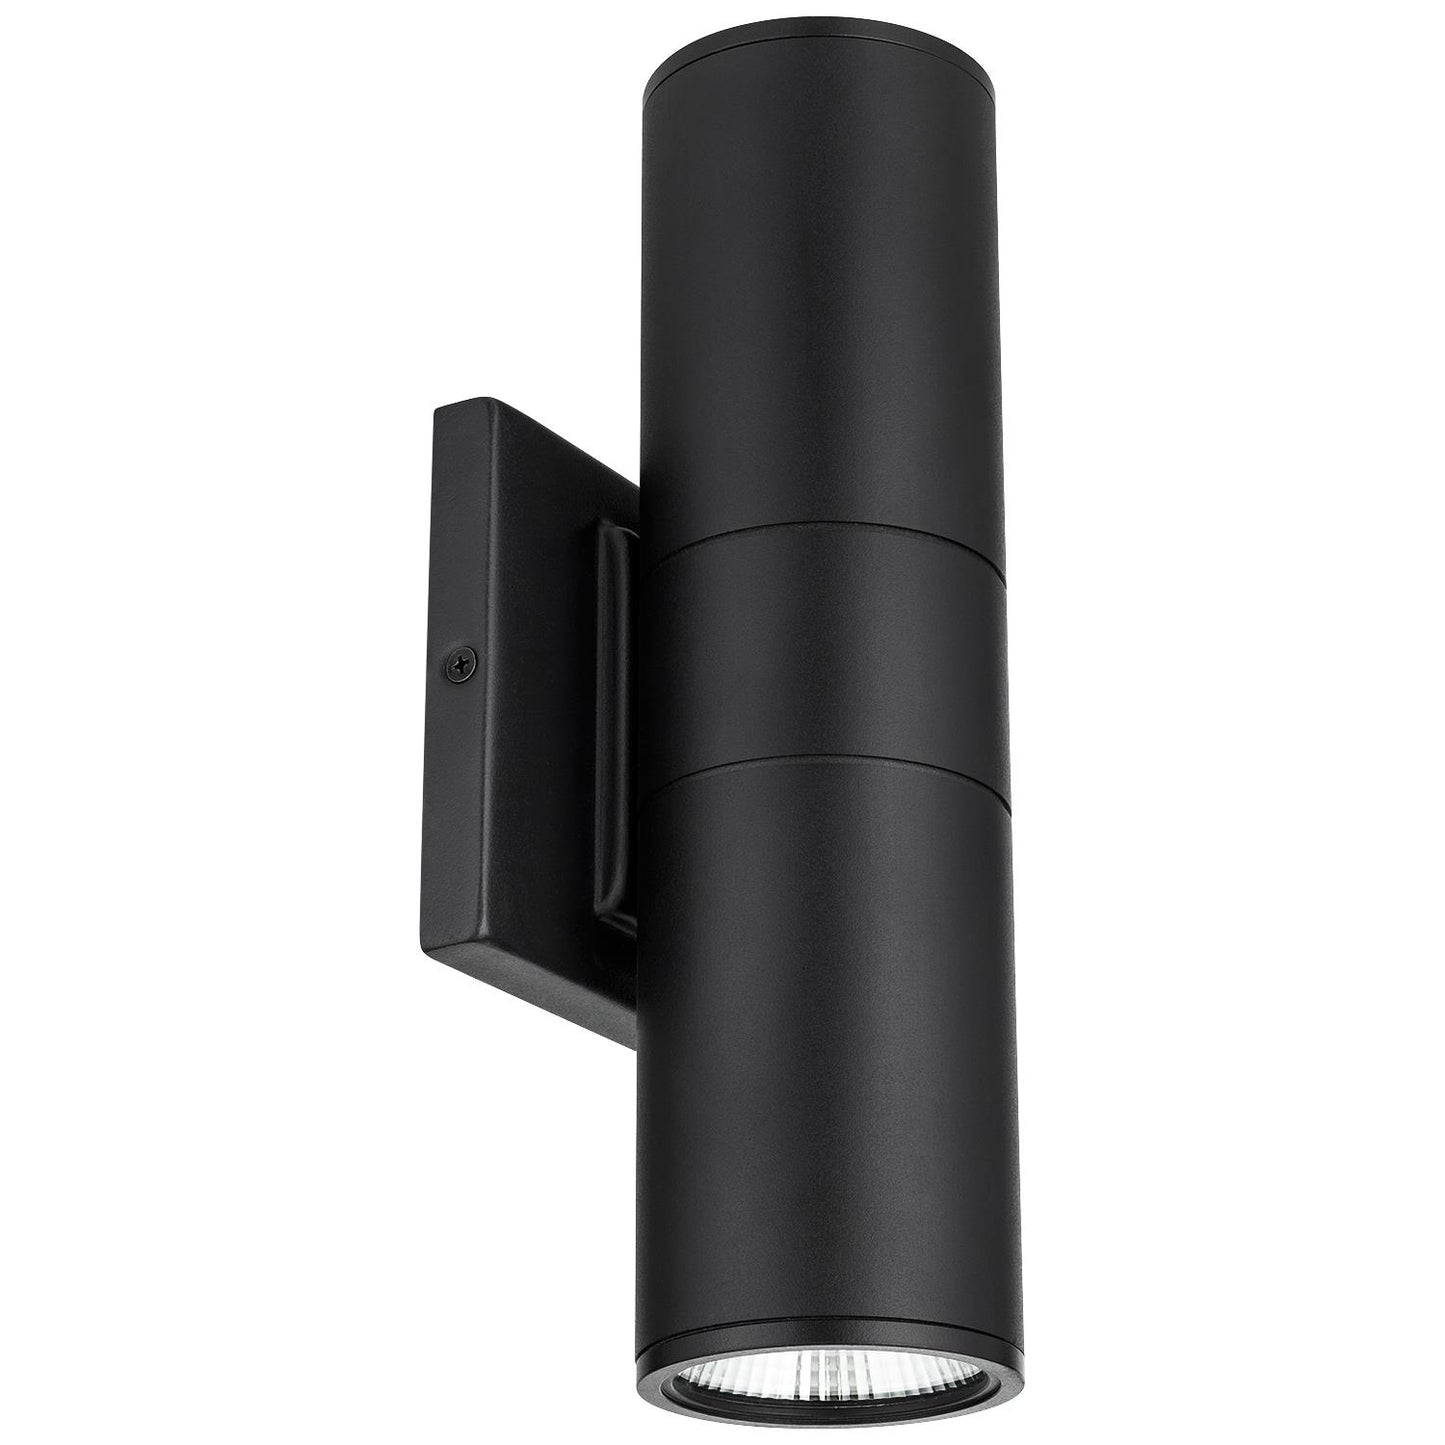 Sunlite 88133-SU LED Up and Down Outdoor Wall Light Fixture, 20 Watts, 1400 Lumens, 50,000 Hour Life Span, Black Finish, ETL Listed, Energy Star Certified, 30K - Warm White